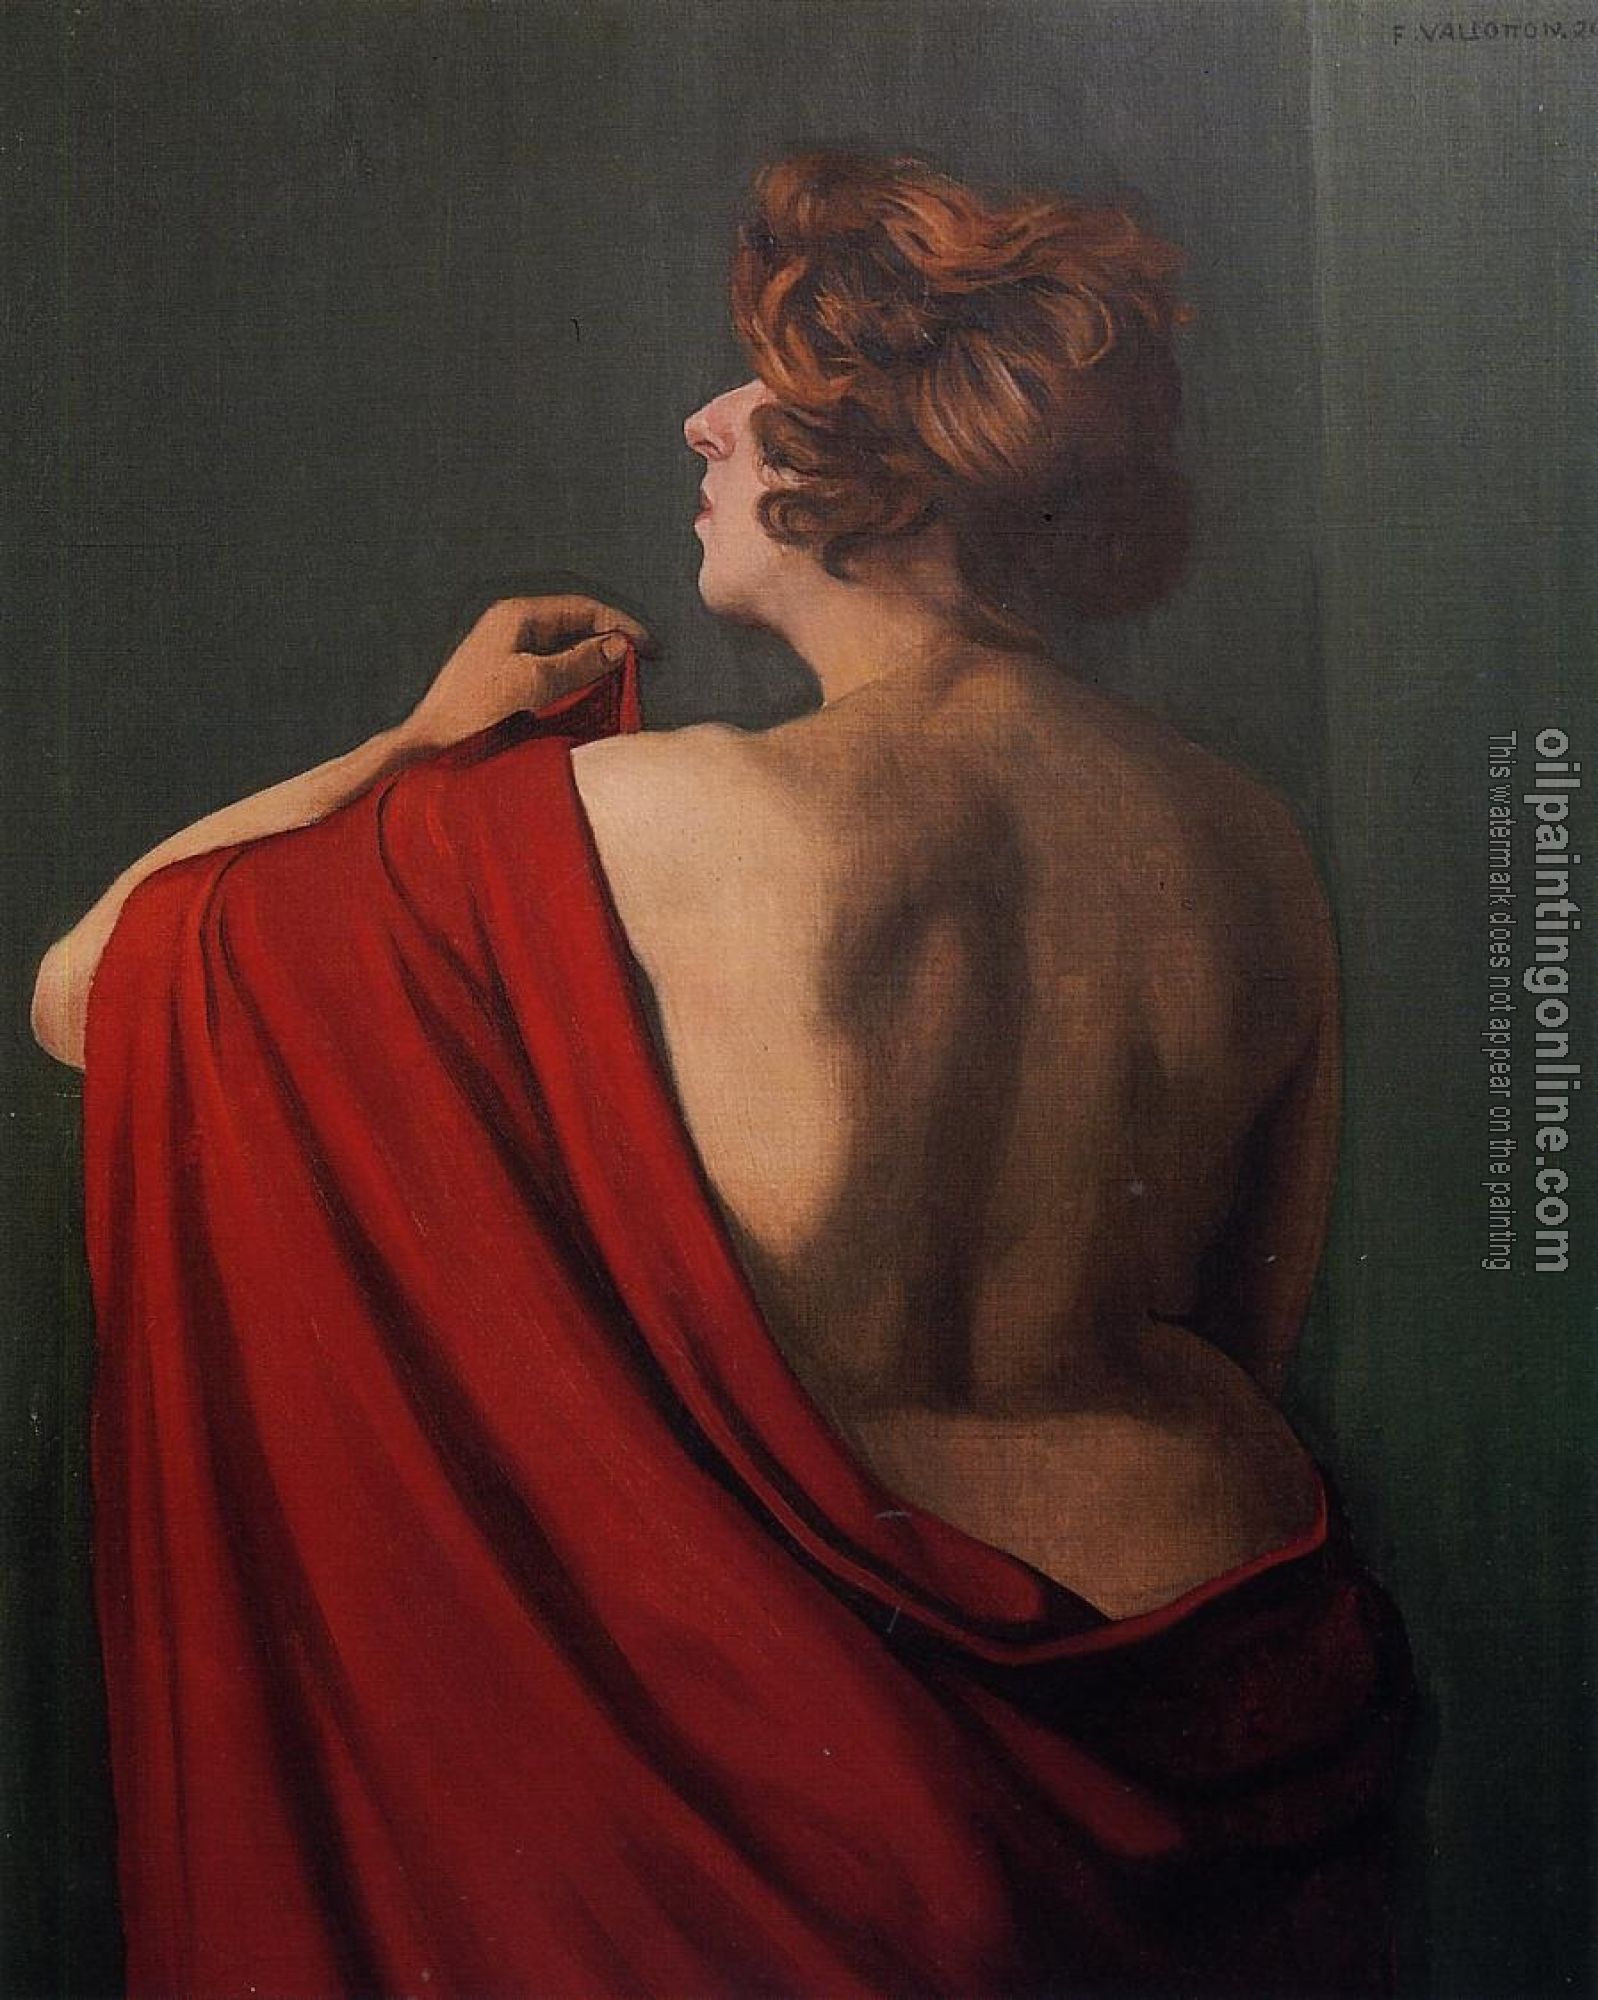 Felix Vallotton - Woman with Red Shawl